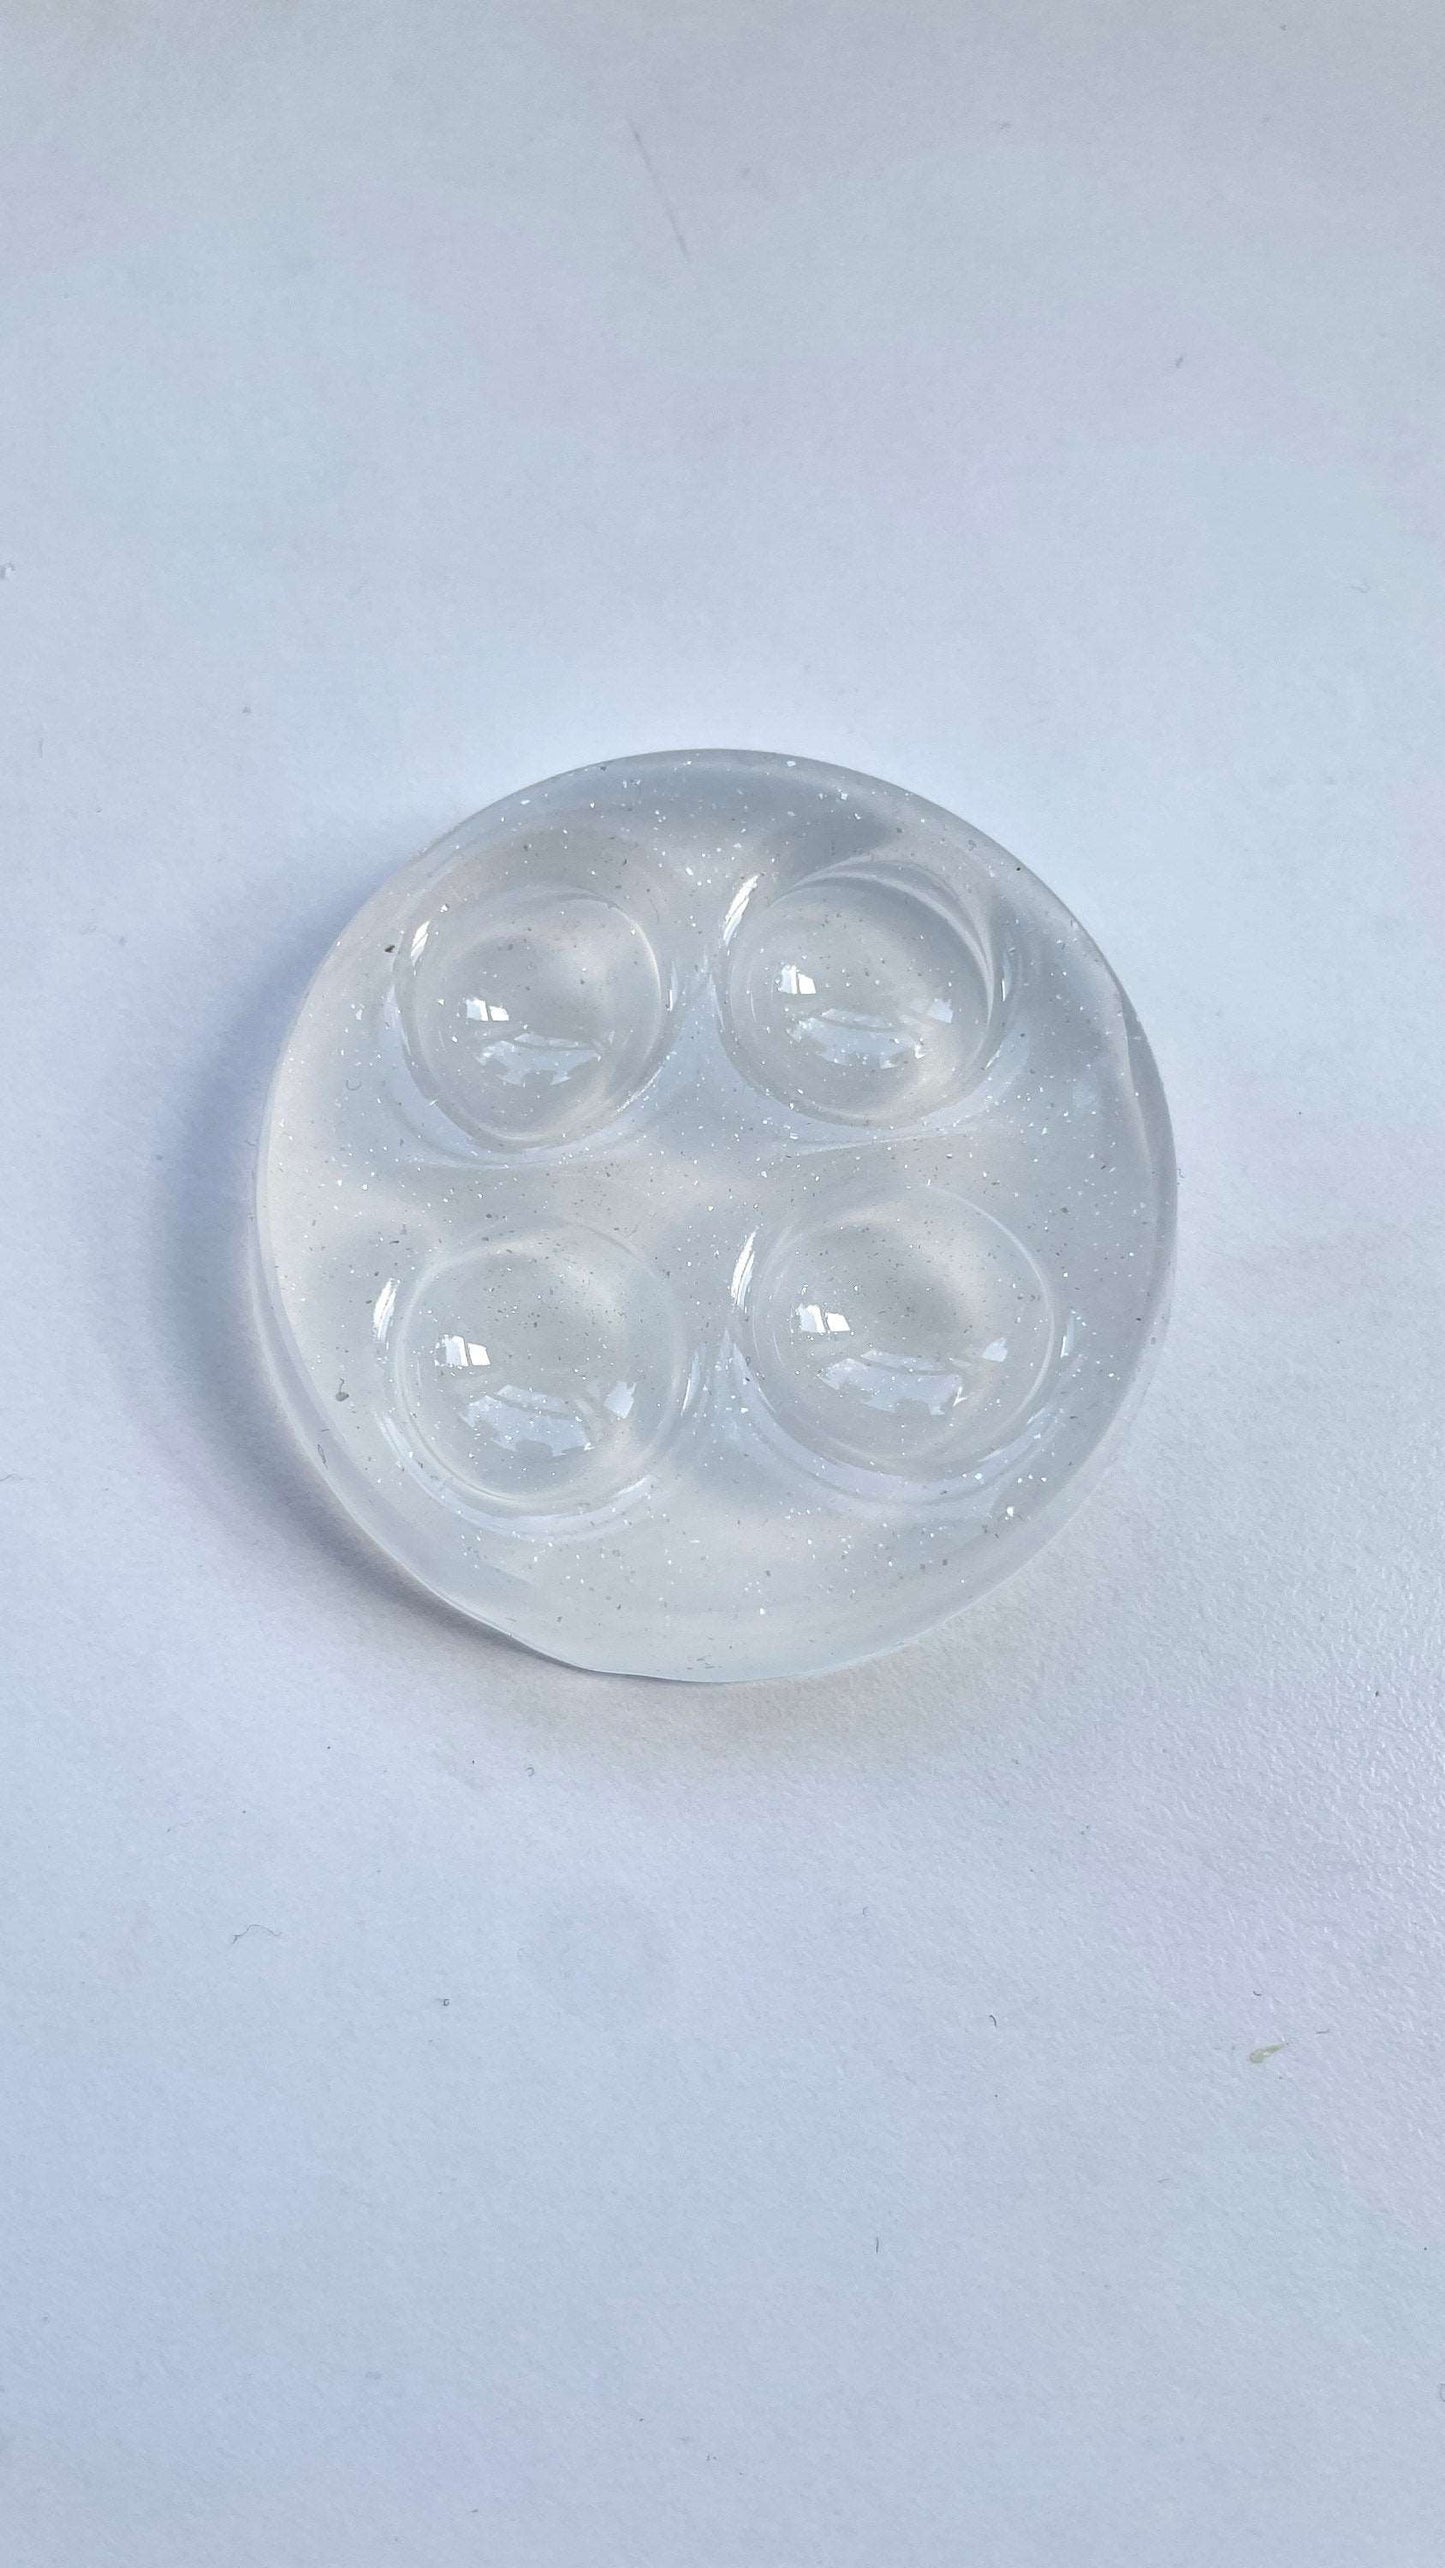 4 x Pill Mold 10 *6 mm Transparent Silicone Mold Resin molds for pendants, earrings, necklaces, rings, jewelry making DIY... bijouterie